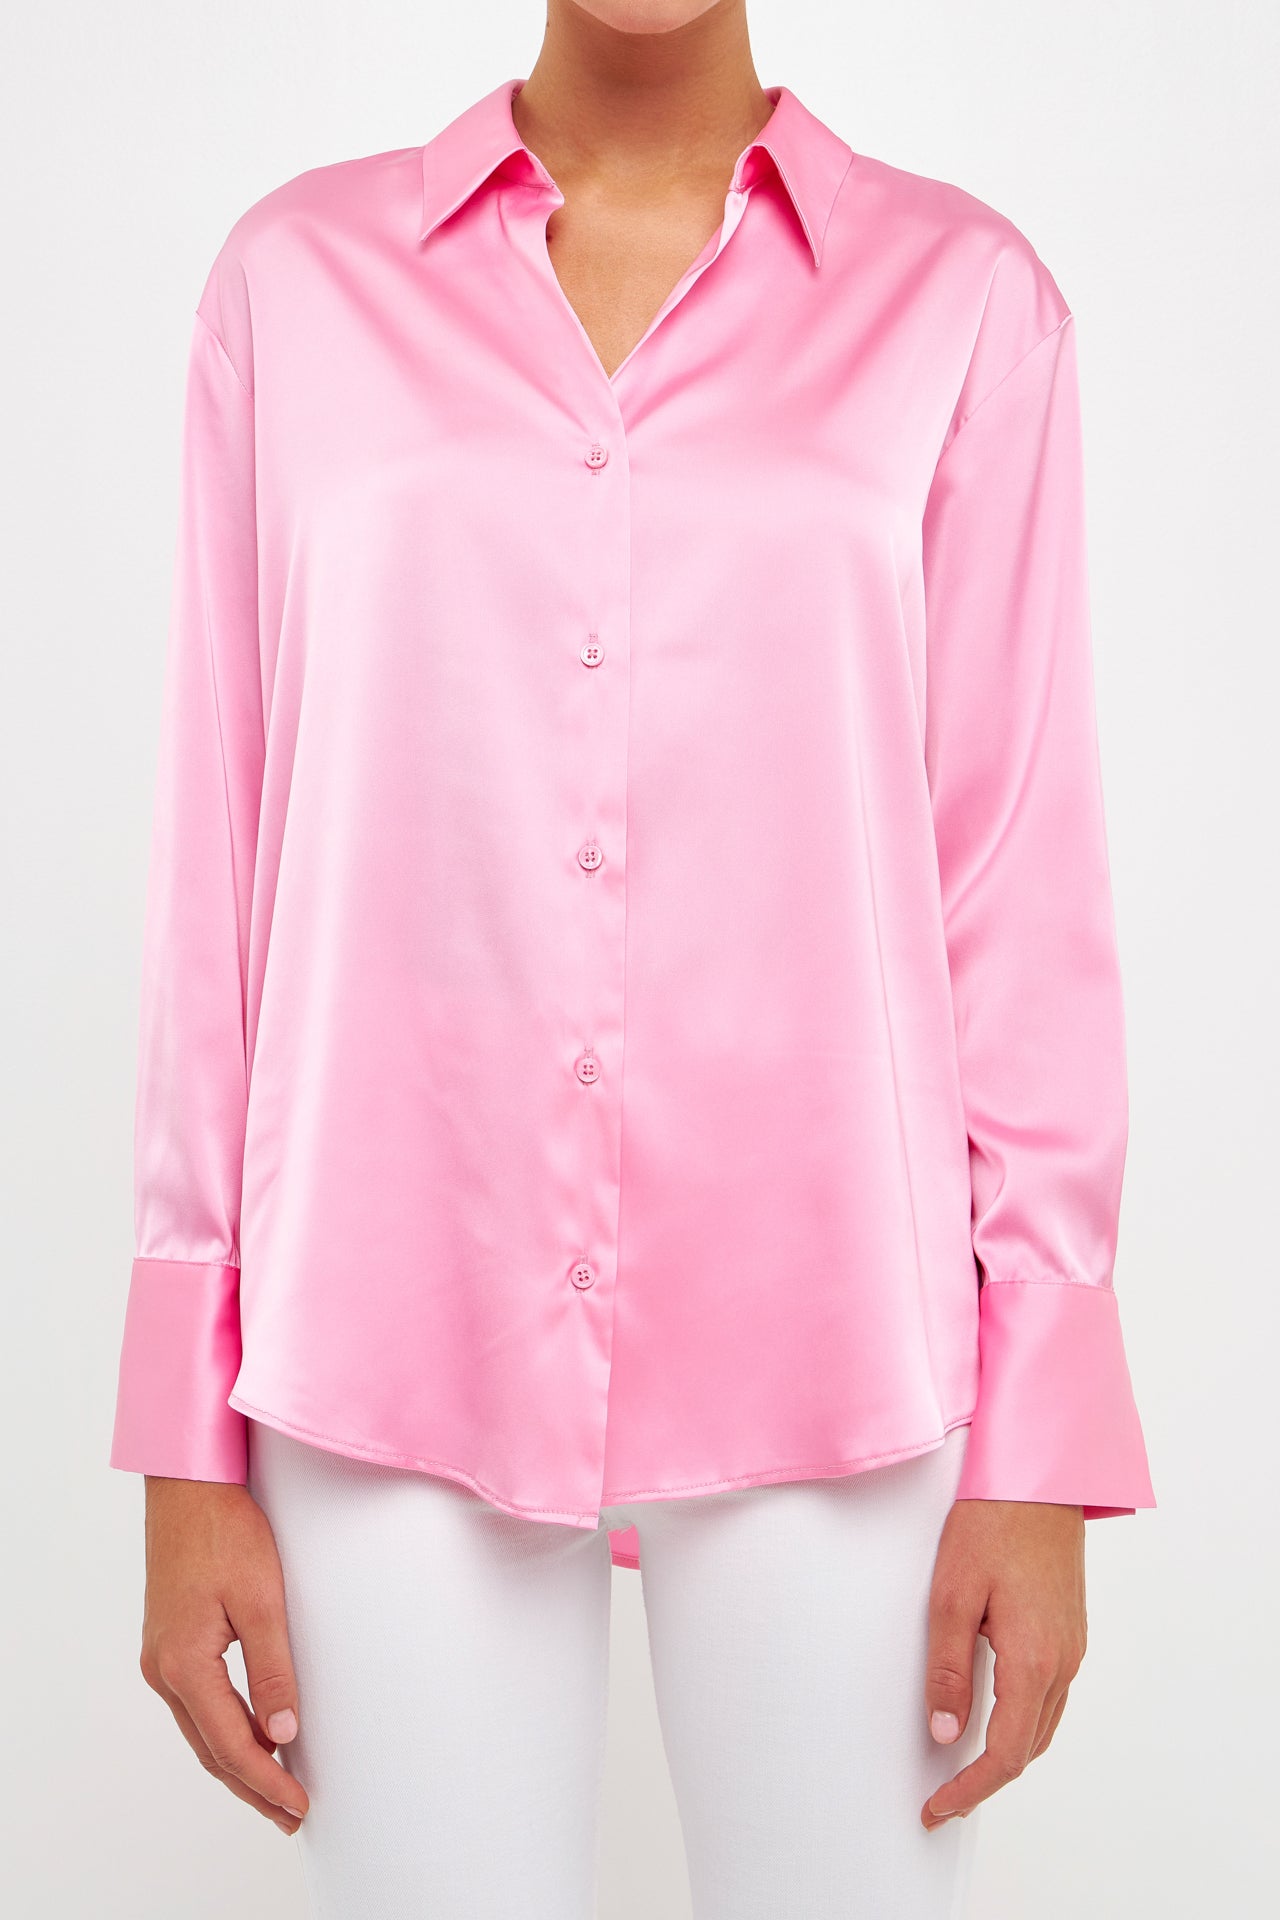 ENDLESS ROSE - Silky Button up Top - SHIRTS & BLOUSES available at Objectrare